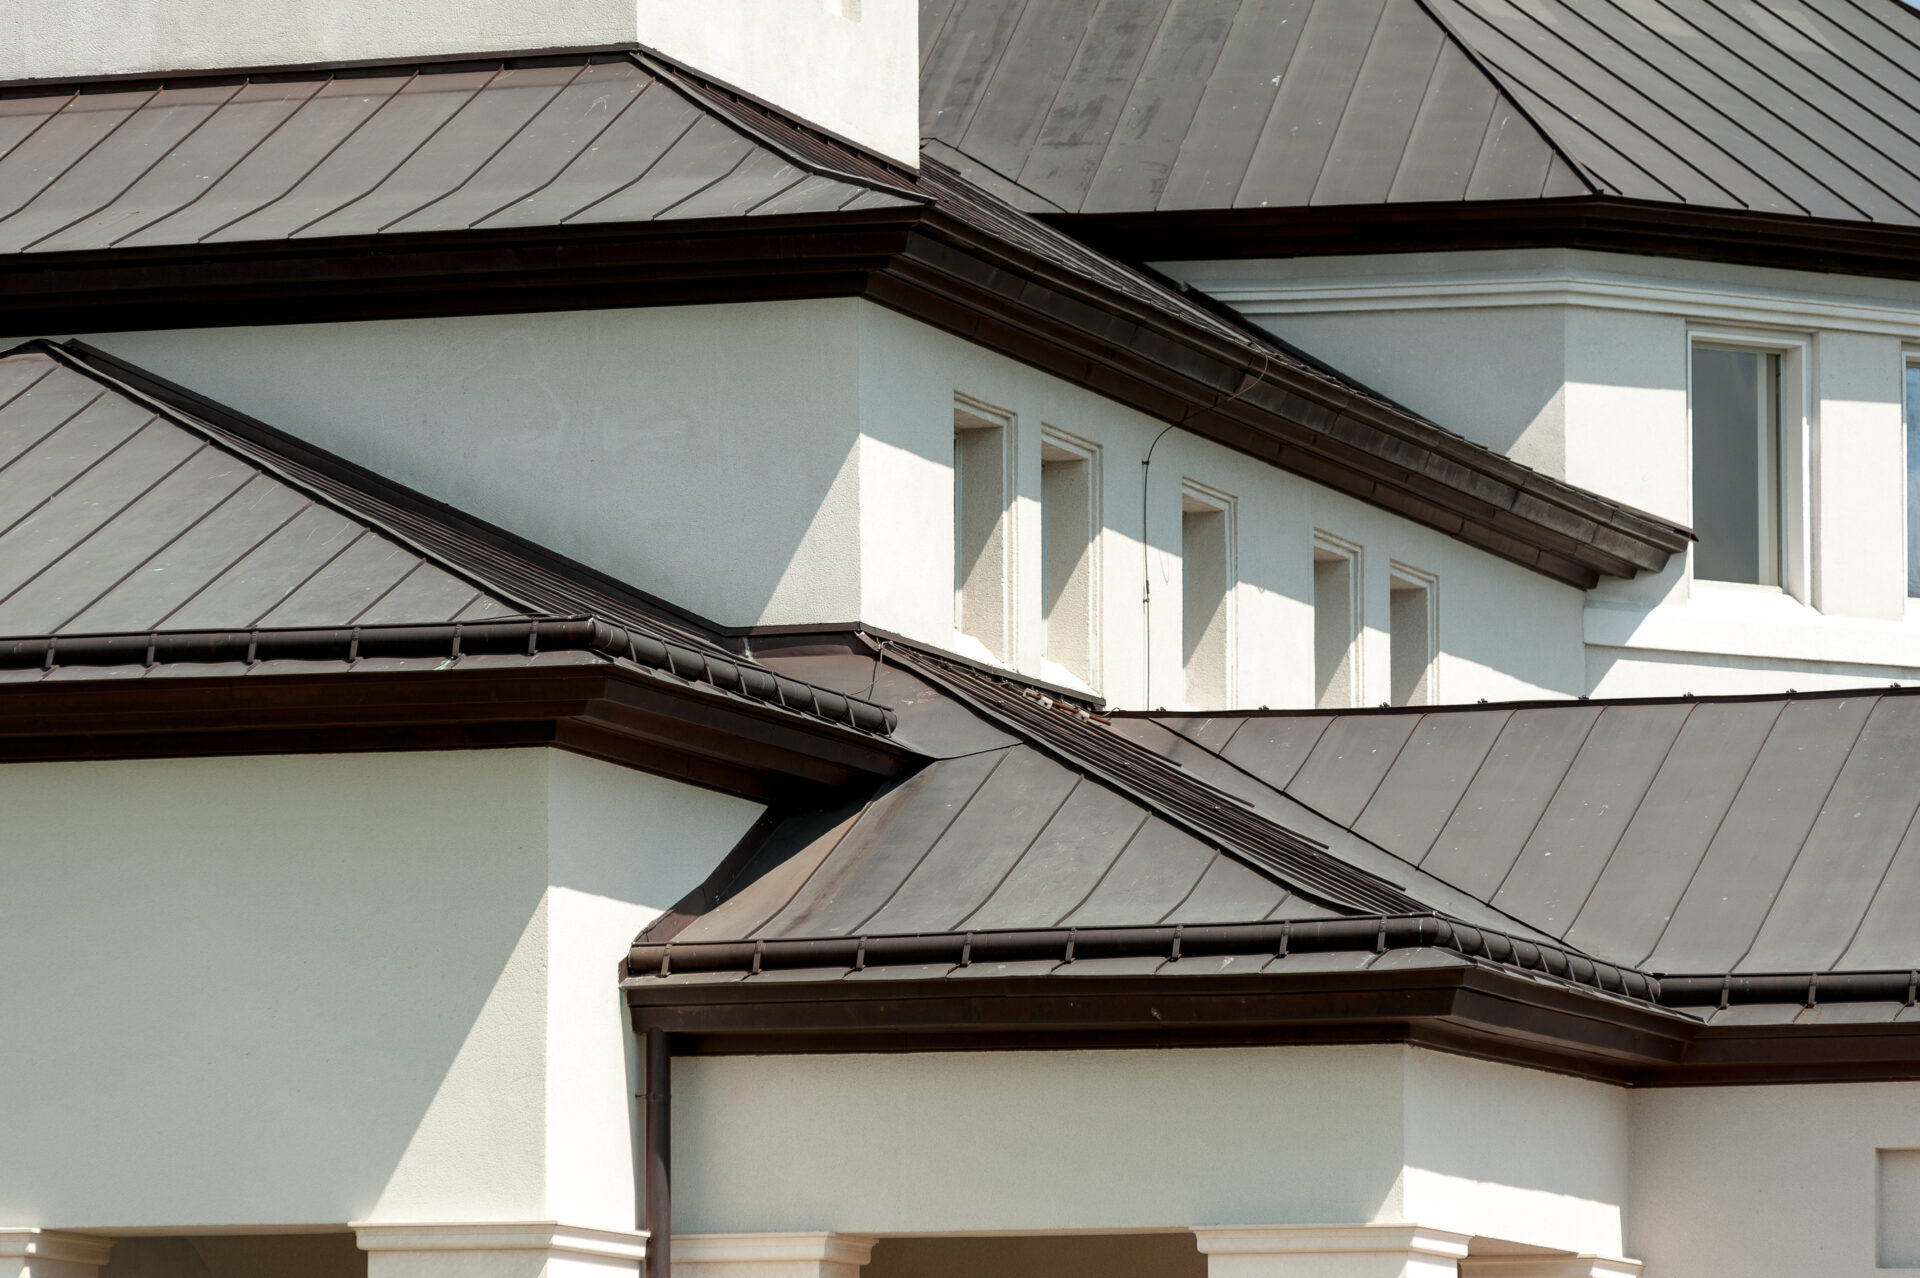  Metal Roofs: Built To Last A Lifetime (Literally)